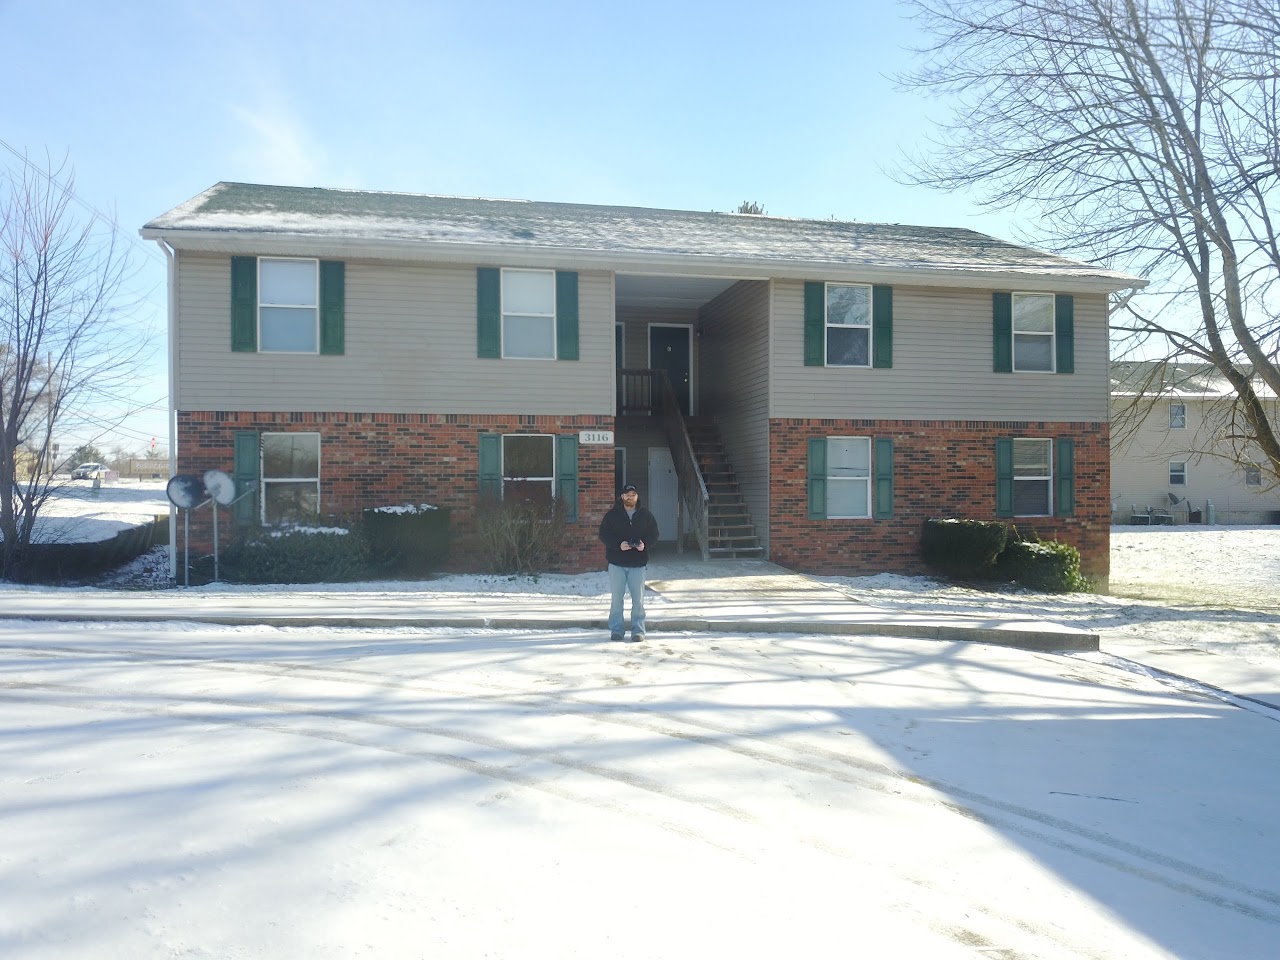 Photo of SHAWNEE APTS. Affordable housing located at 100 SHAWNEE LN BEDFORD, IN 47421